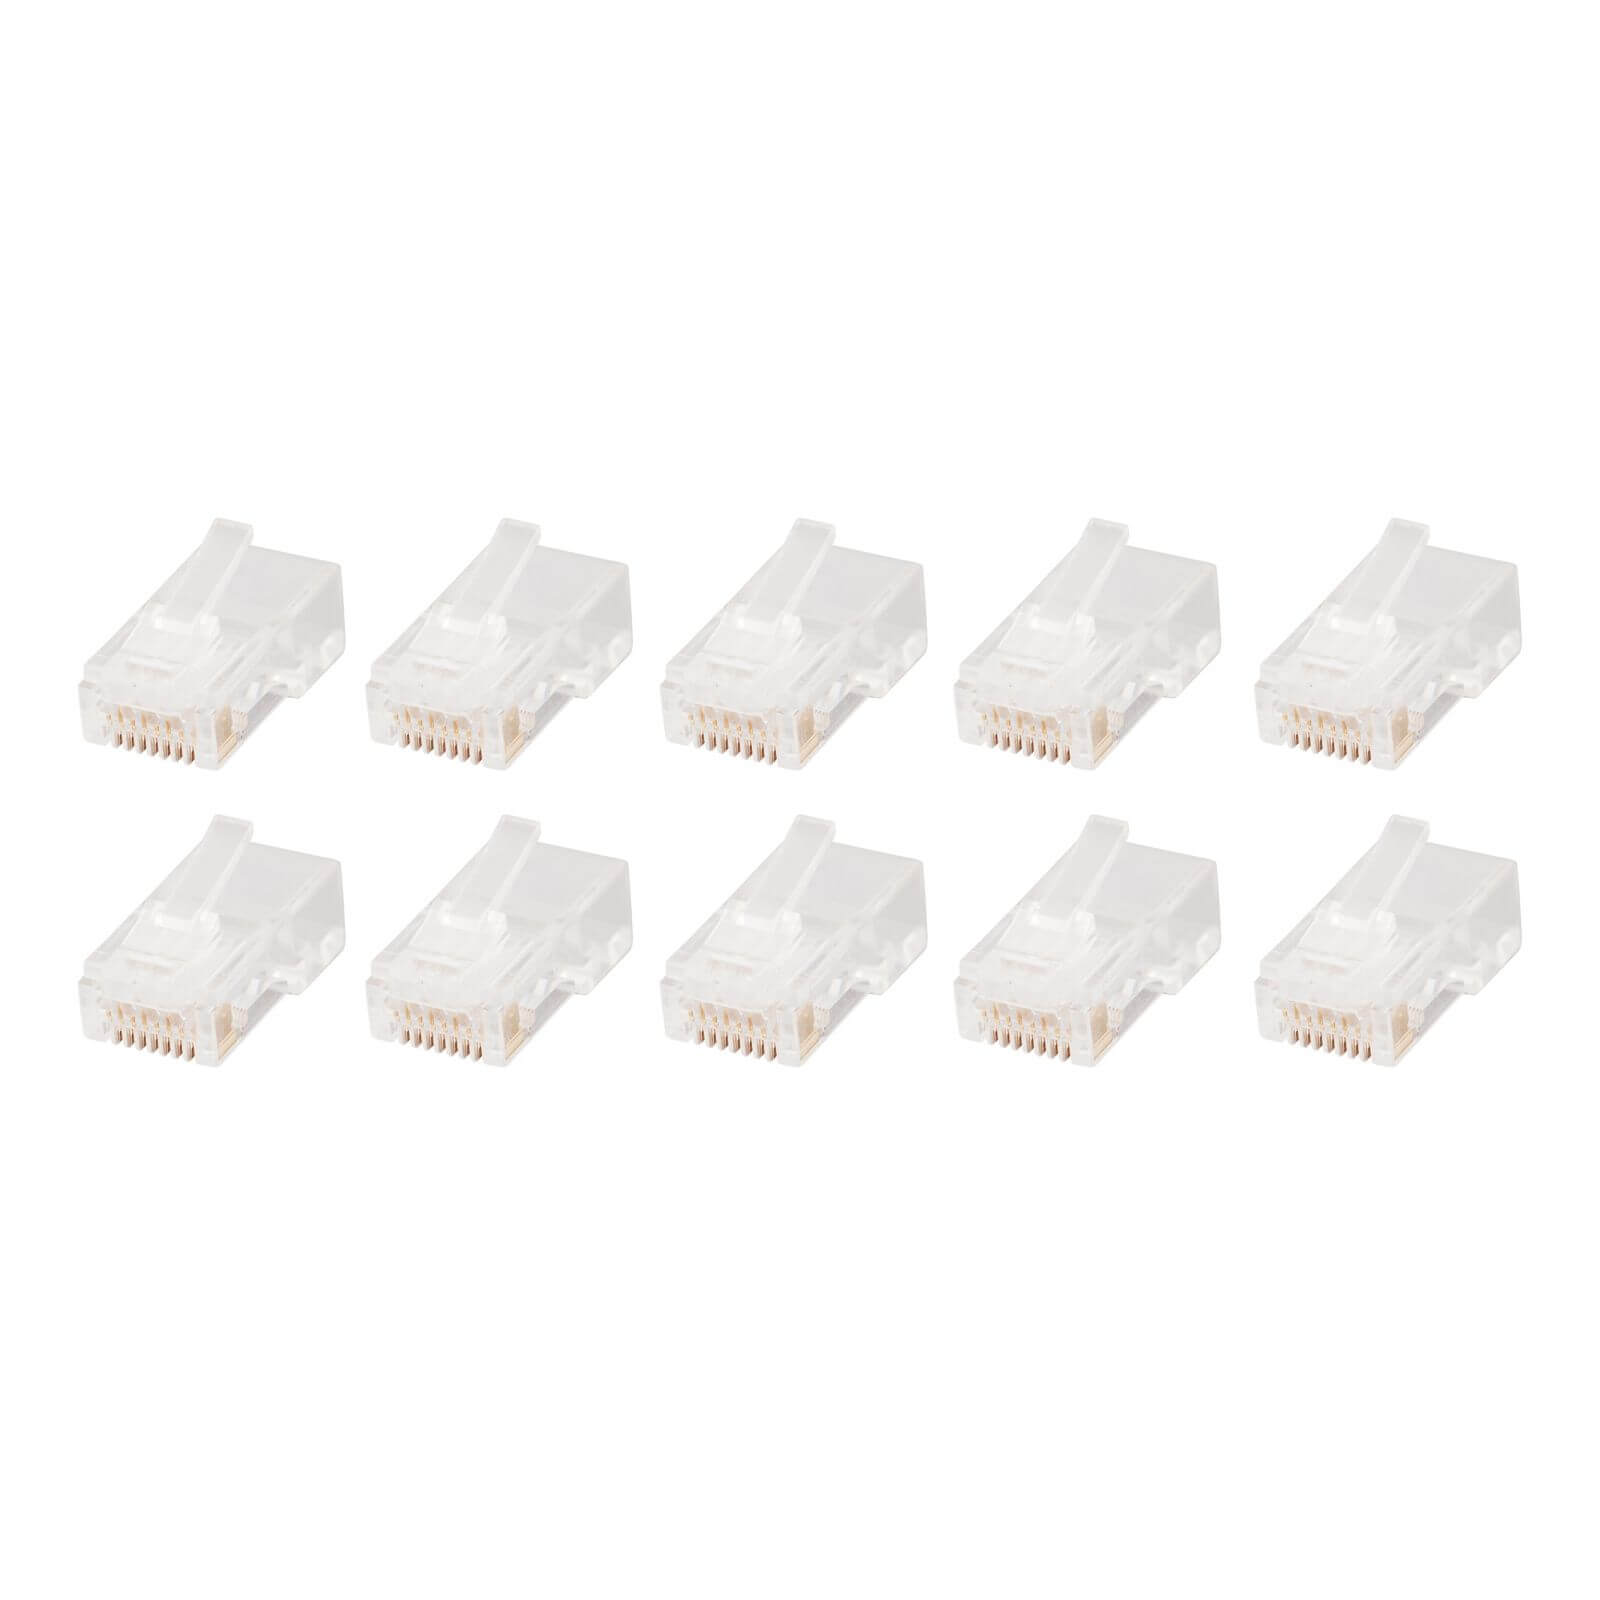 Photo of Antsig Rj45 Ethernet Connector Boots 10 Pack